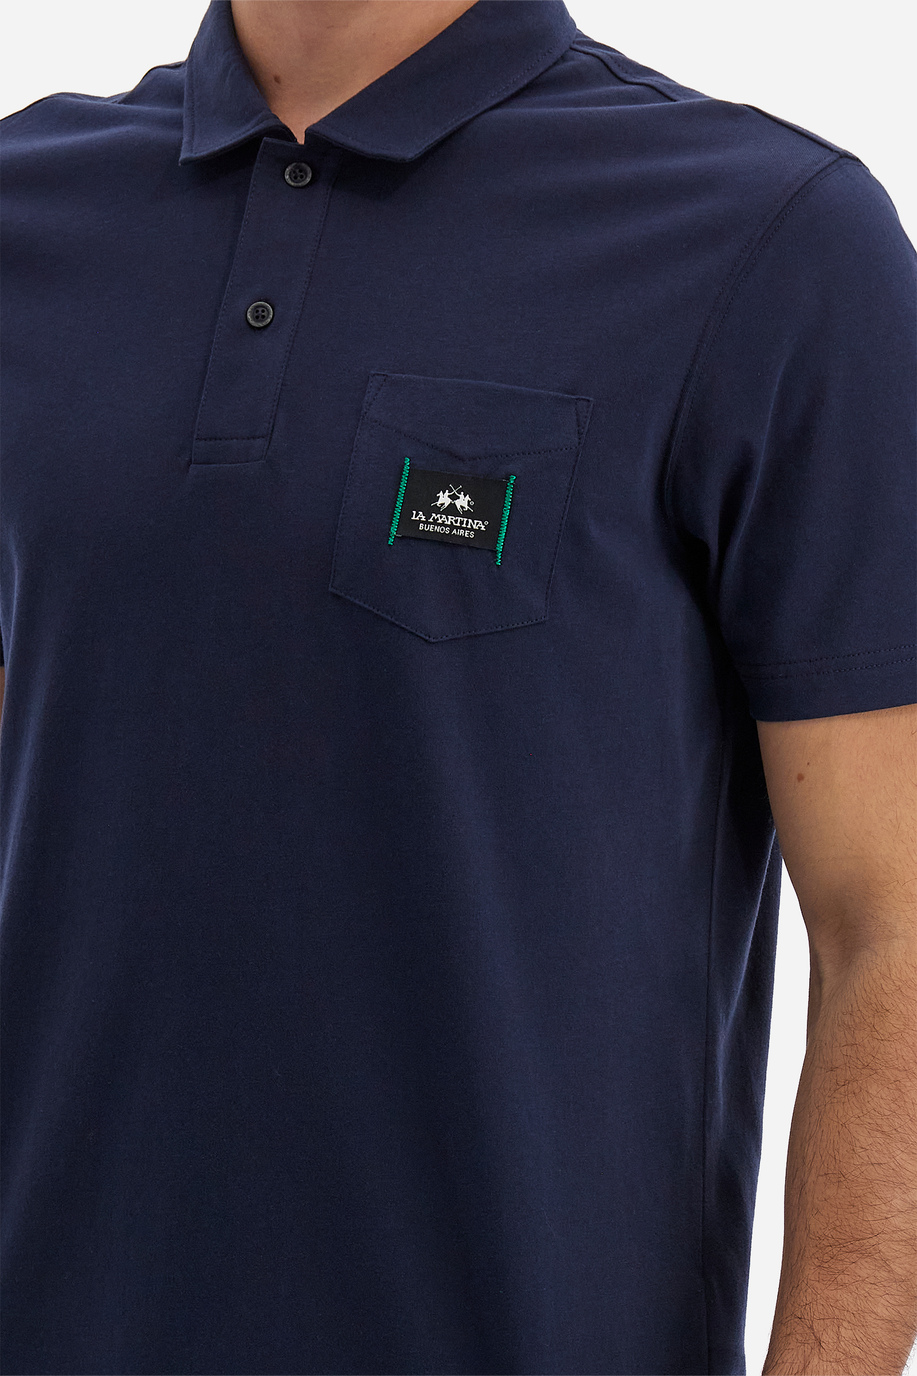 Men's short-sleeved polo shirt Logos with flat mini pocket in solid color - Vasant - Polo Shirts | La Martina - Official Online Shop